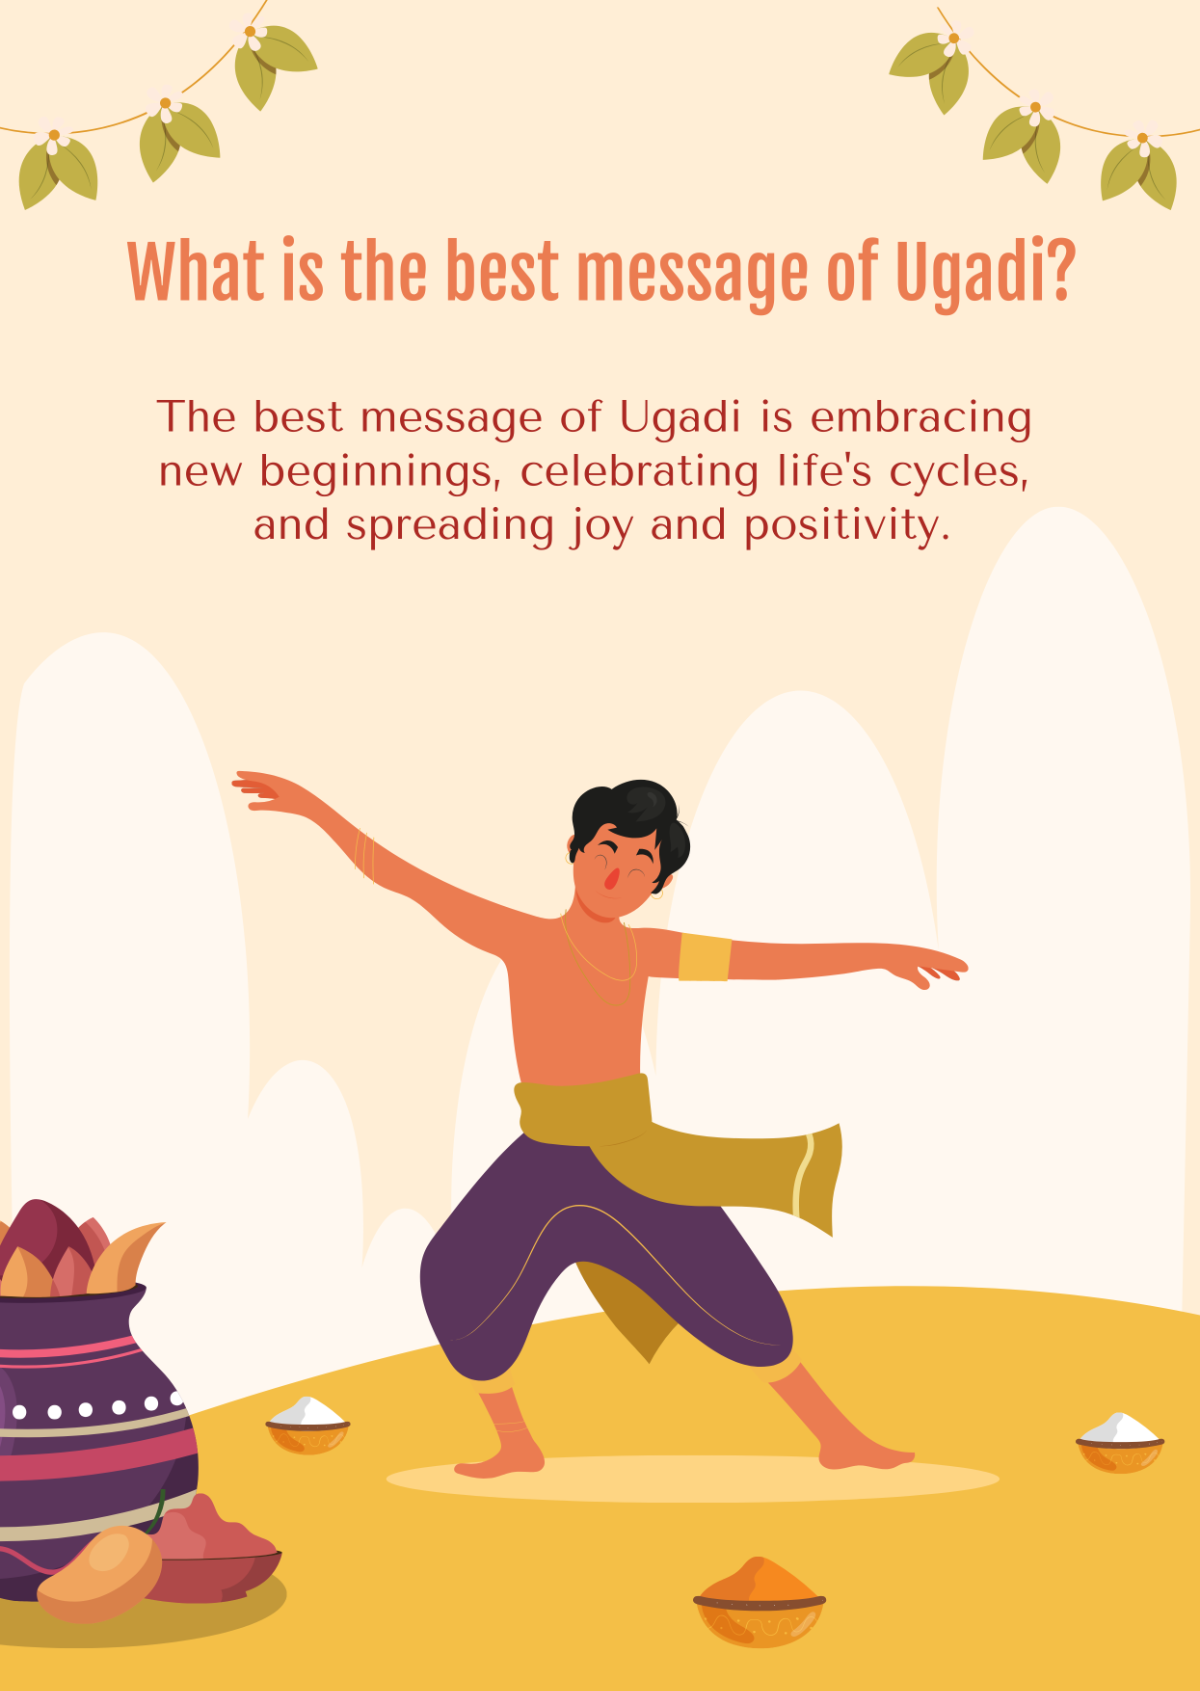 What is the best message of Ugadi